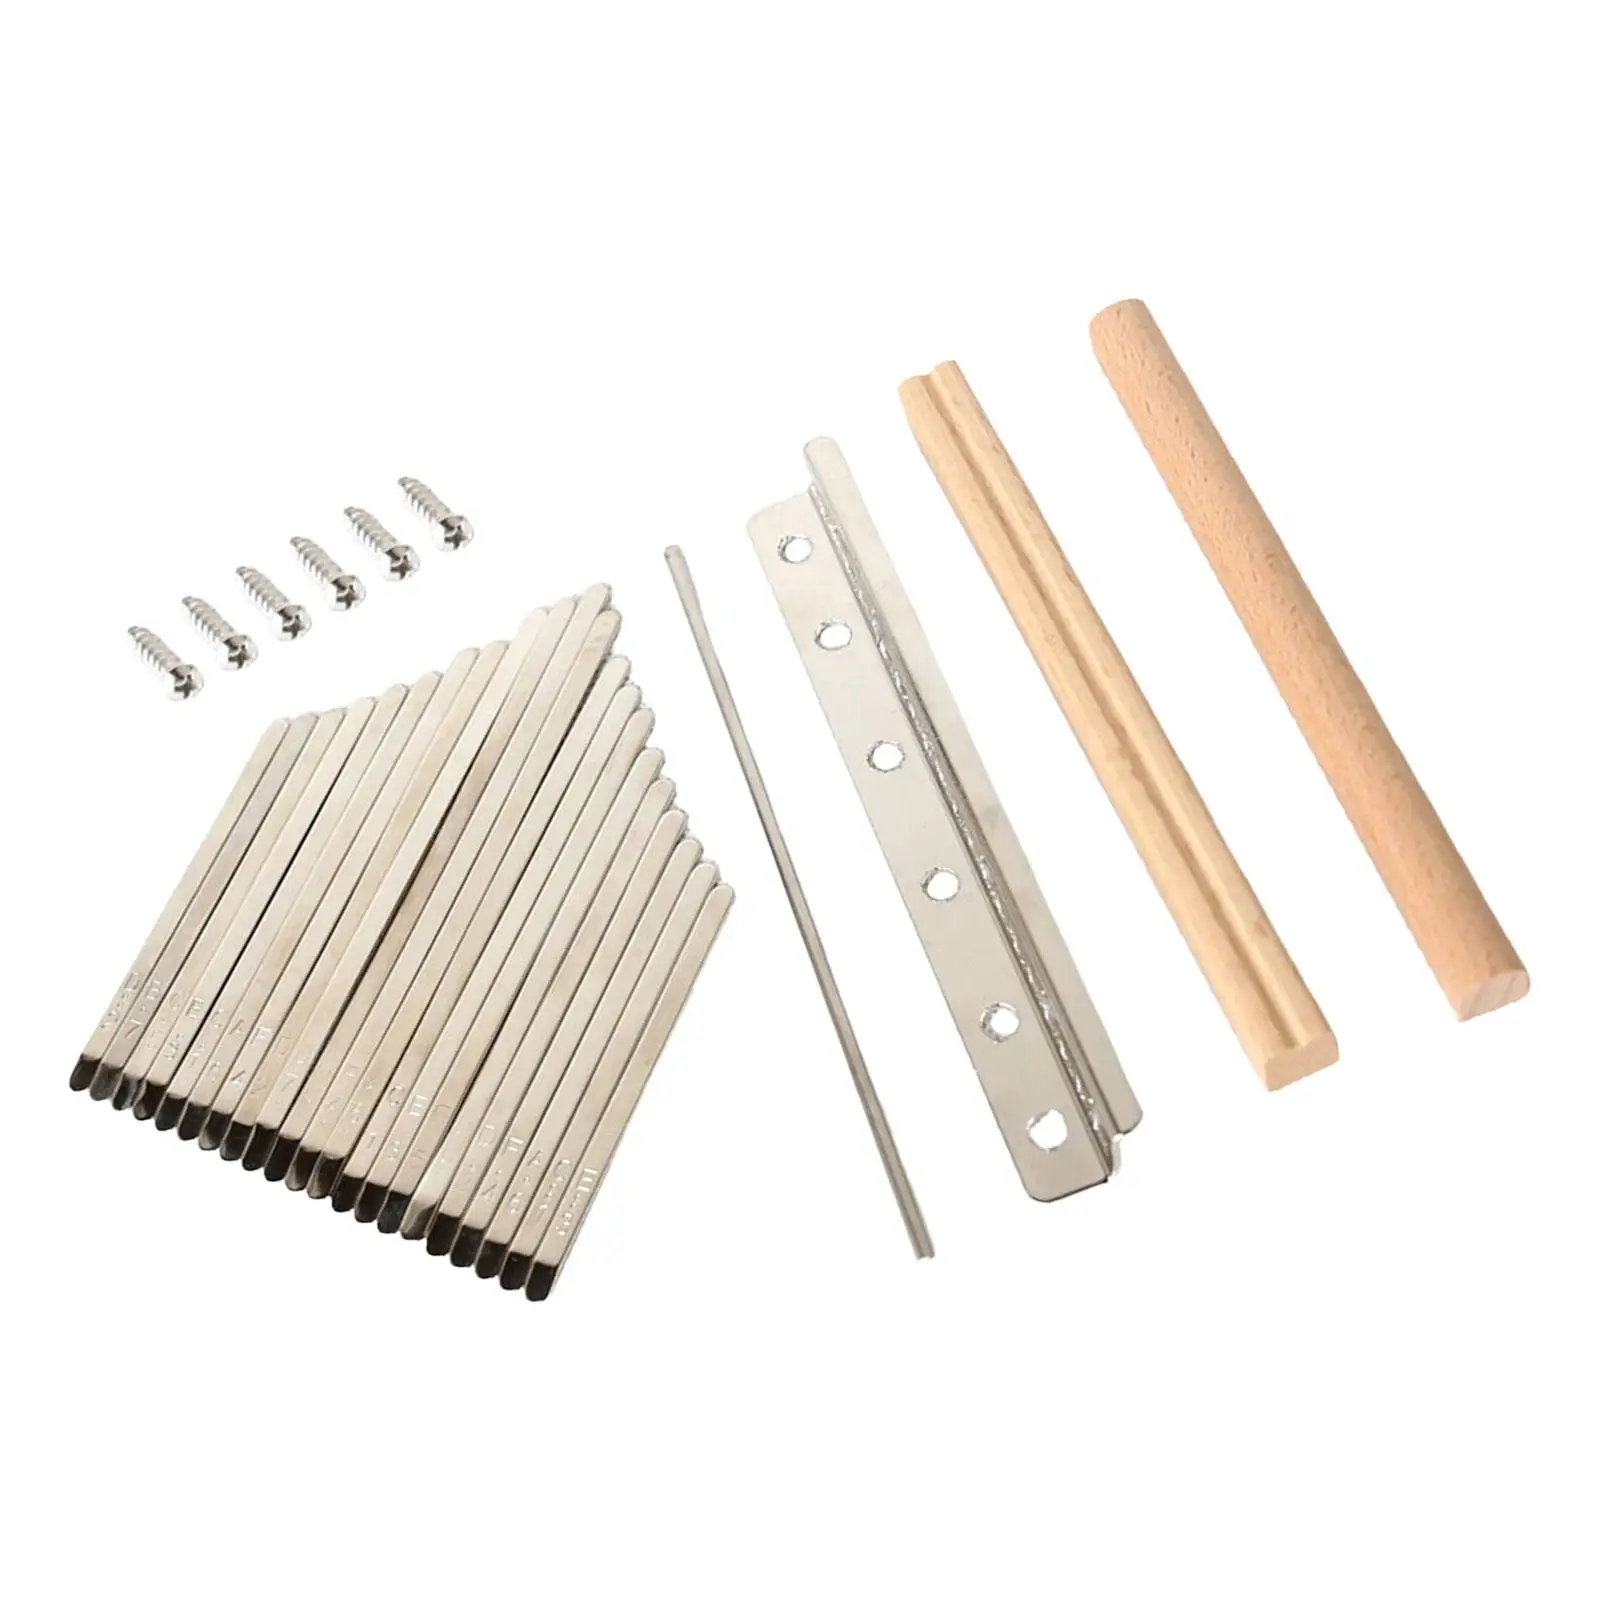 21 Key Thumb Piano DIY Accessories Luthier Supplies Marimbas 21 Keys Replacement Kits for Recording Family Music Lovers